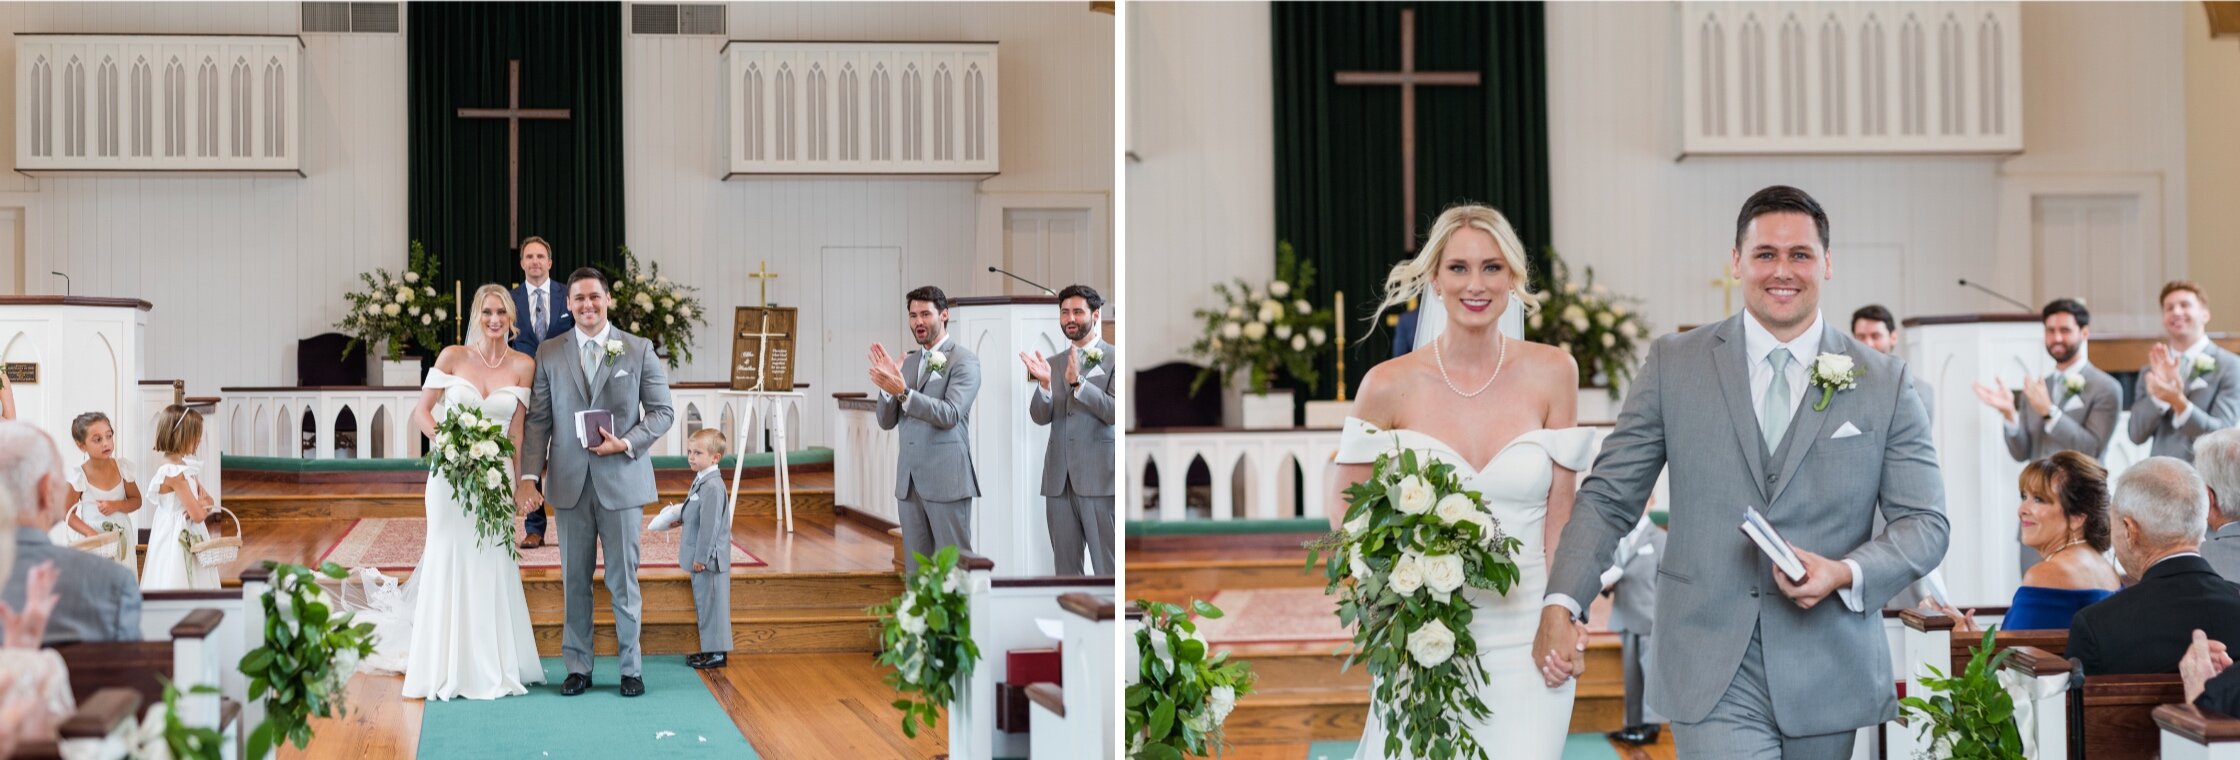 St Francis at the Point in Fairhope Alabama Wedding Ceremony followed by Five Rivers Delta Reception in Spanish Fort Alabama Photographed by Kristen Marcus Photography